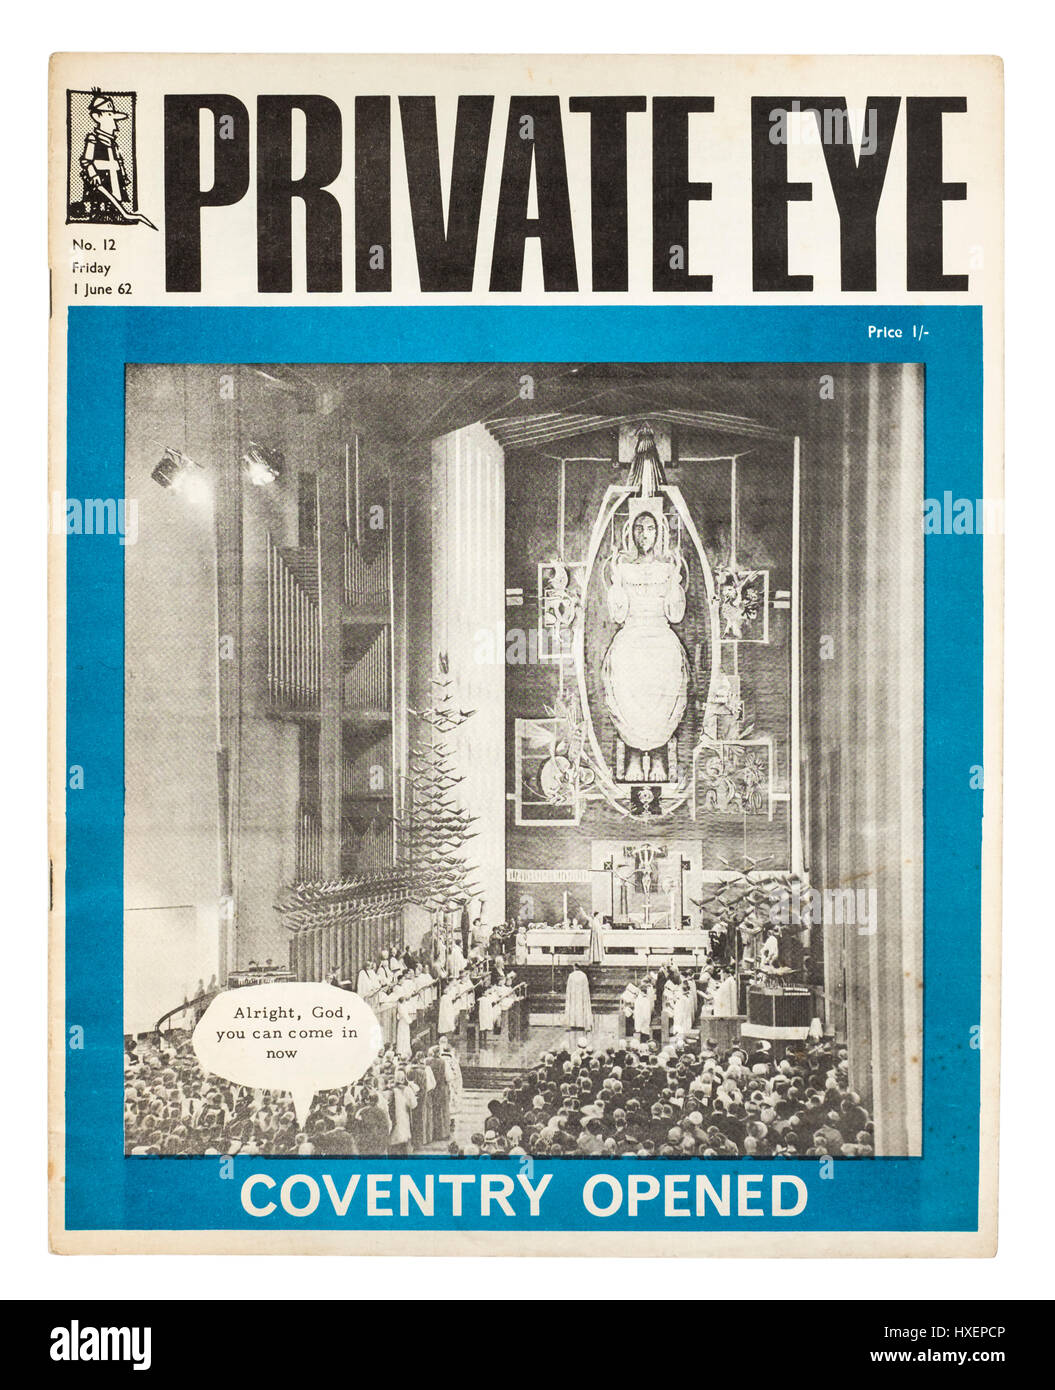 Rare early copy of Private Eye magazine (Issue No 12 dated Friday 1st June 1962) with the opening of the new Coventry Cathedral on the front cover. Stock Photo